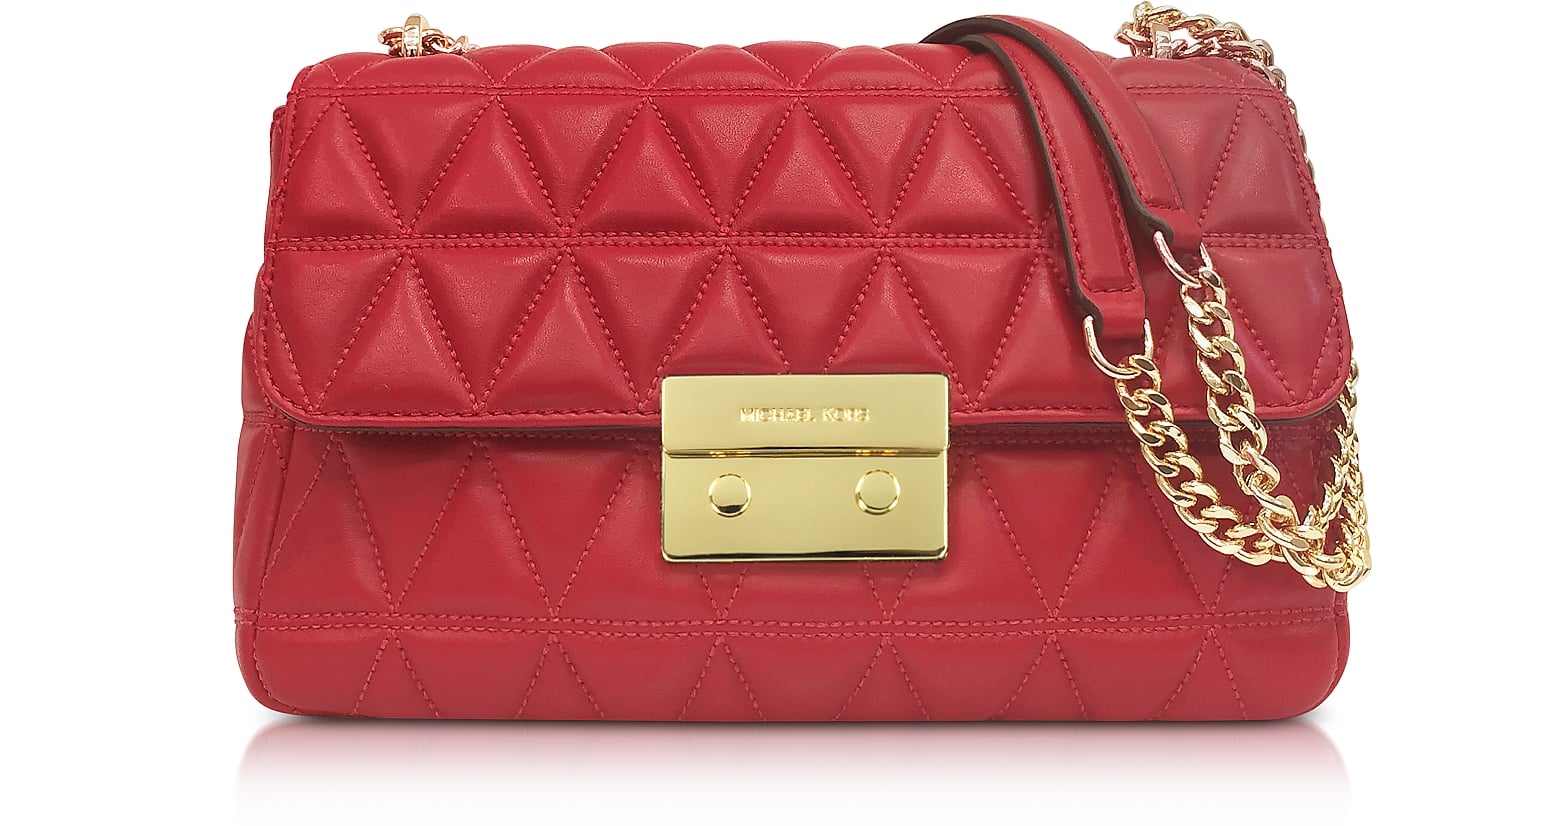 Reese Witherspoon Reese Red Valentino Bag